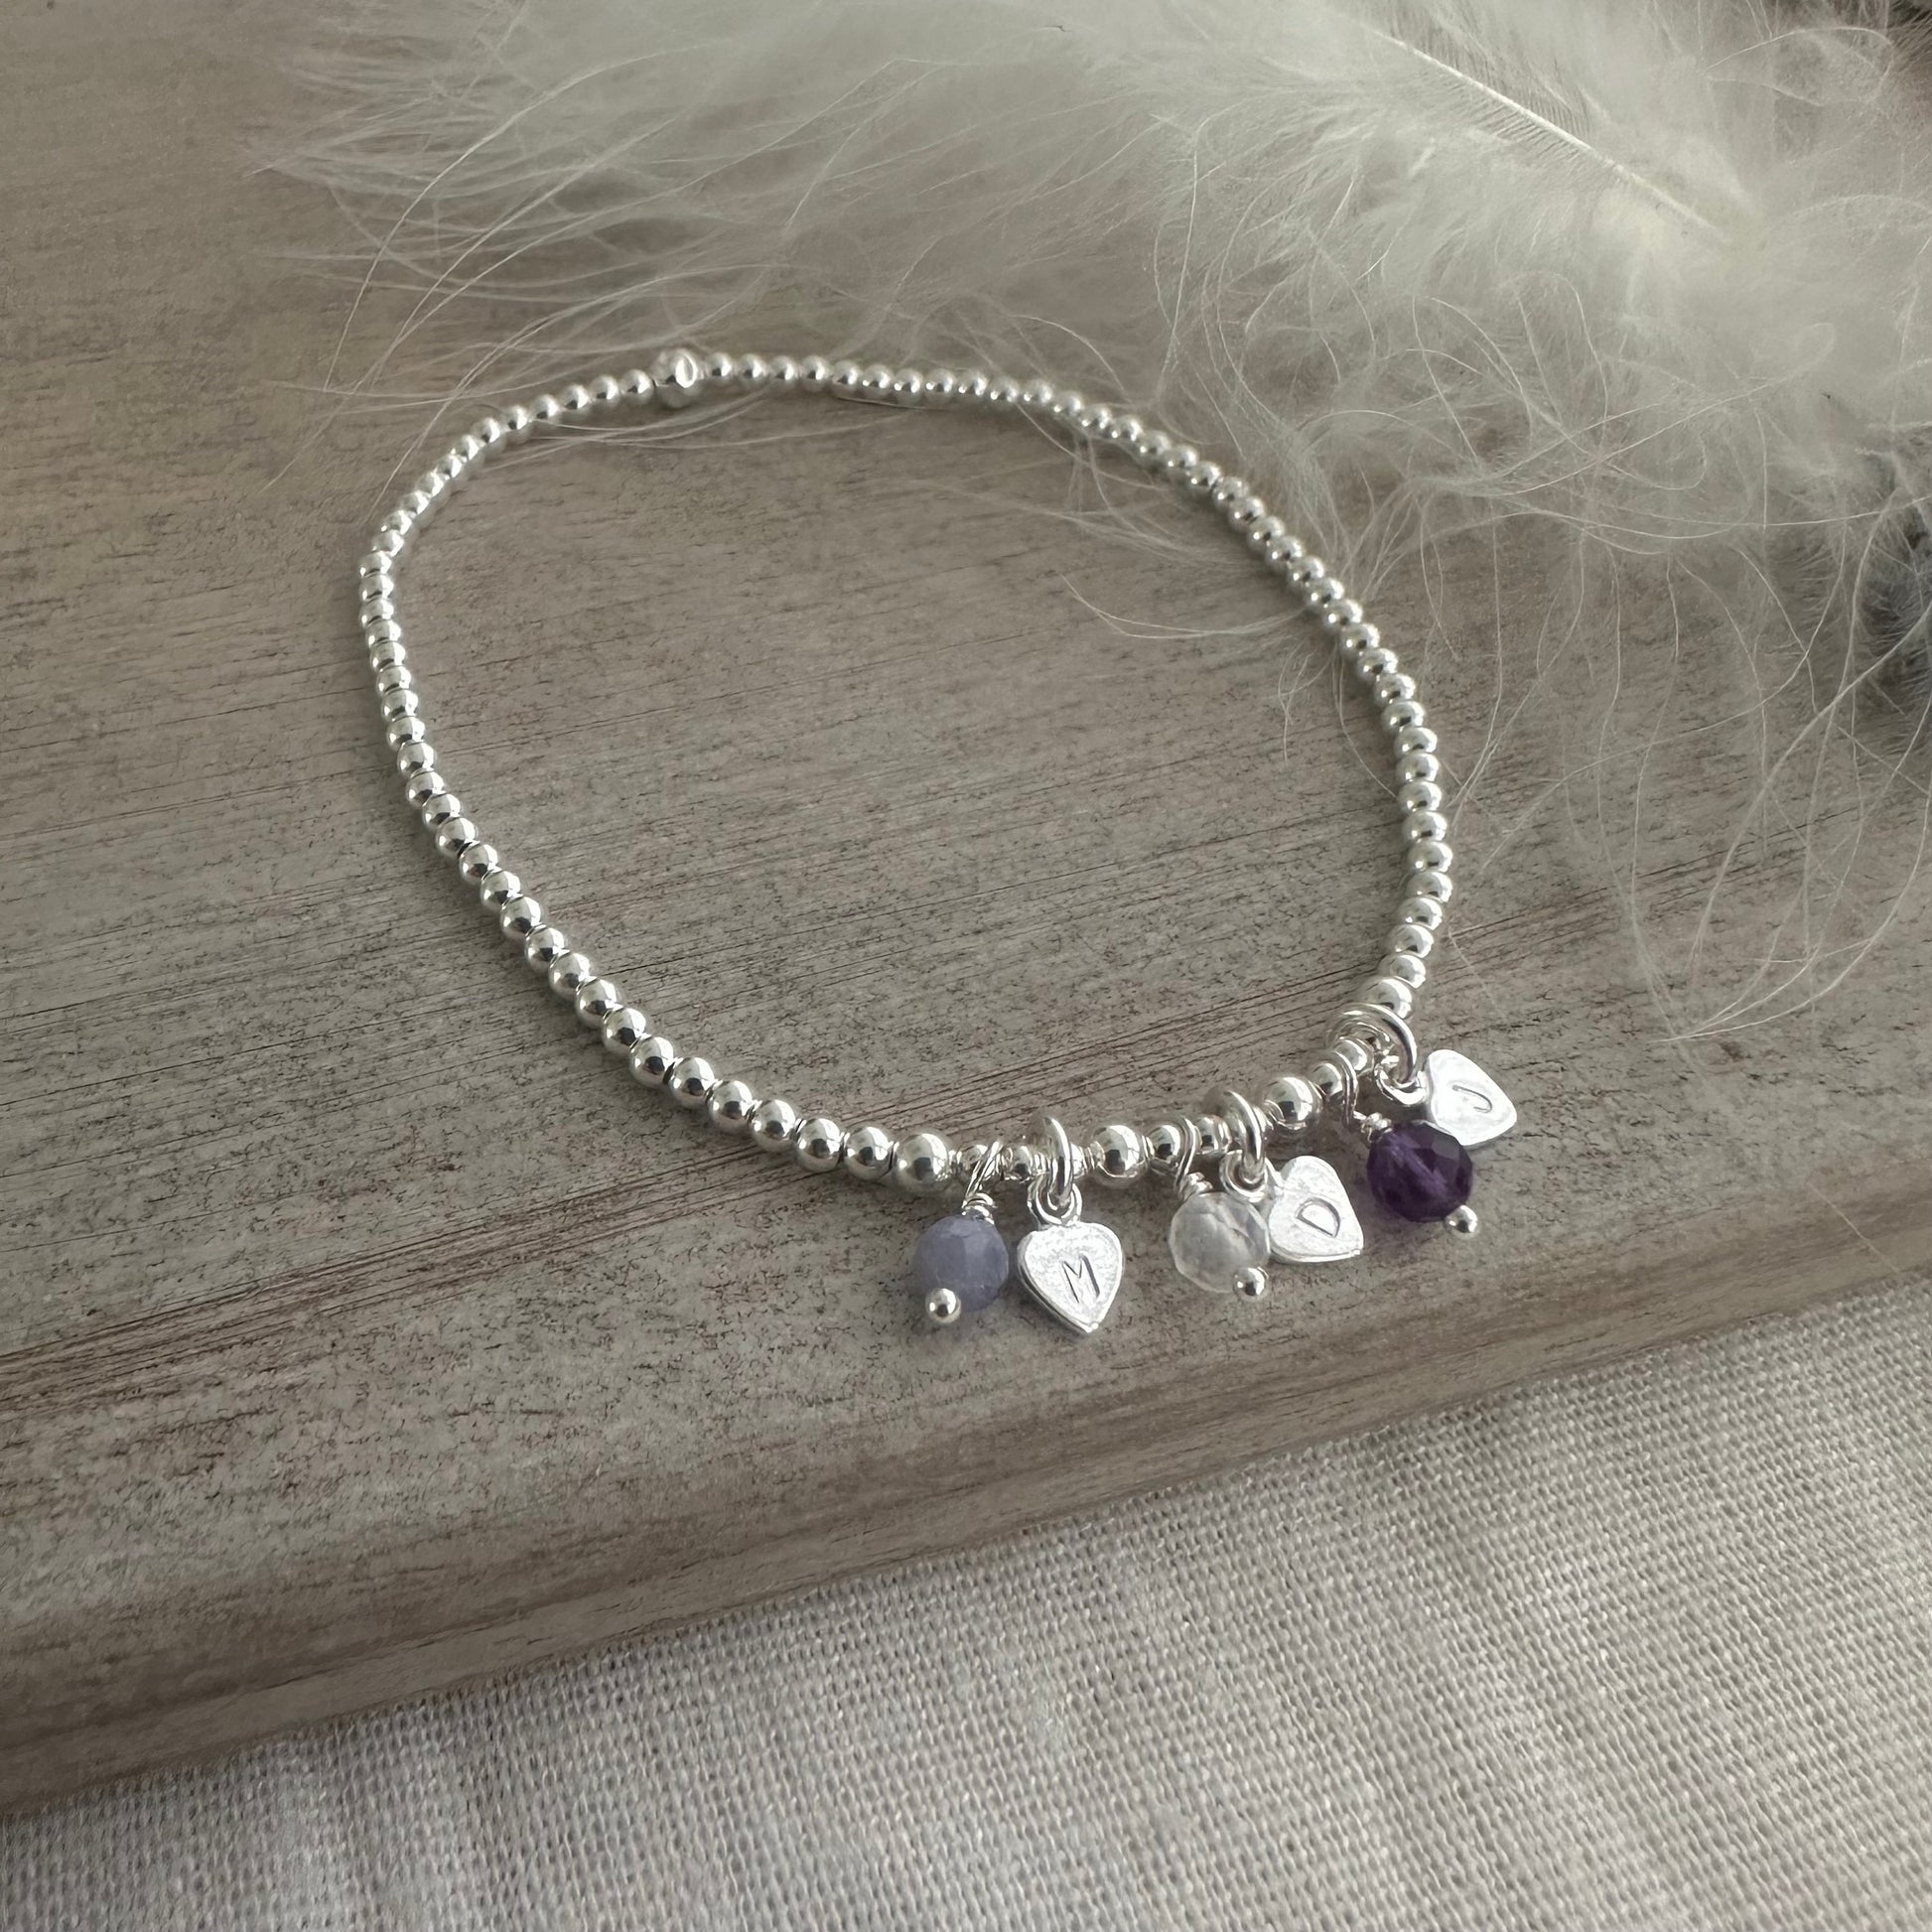 Personalised Stretchy Family Birthstone Bracelet, Family Initials for Mum or Grandmother on stretch material